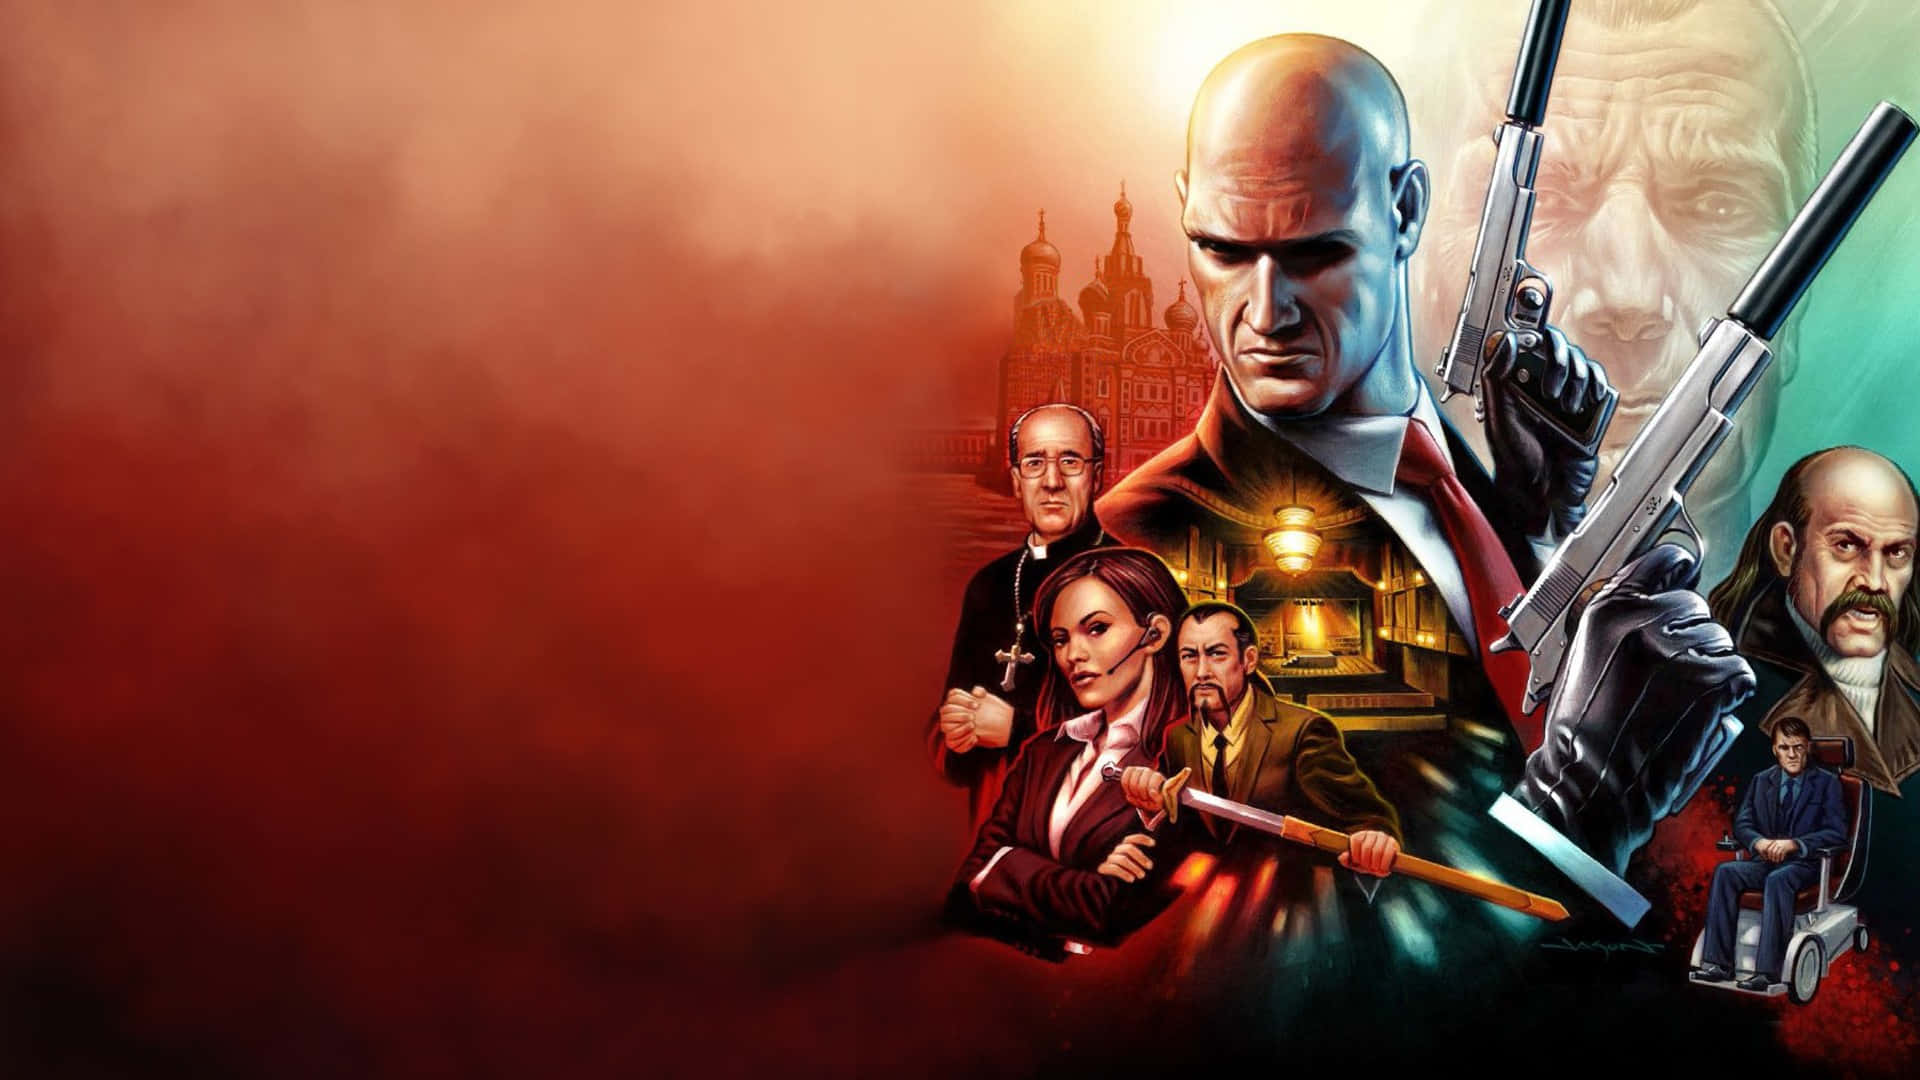 Hitman Absolution - Get Ready to Eliminate Your Targets Skillfully